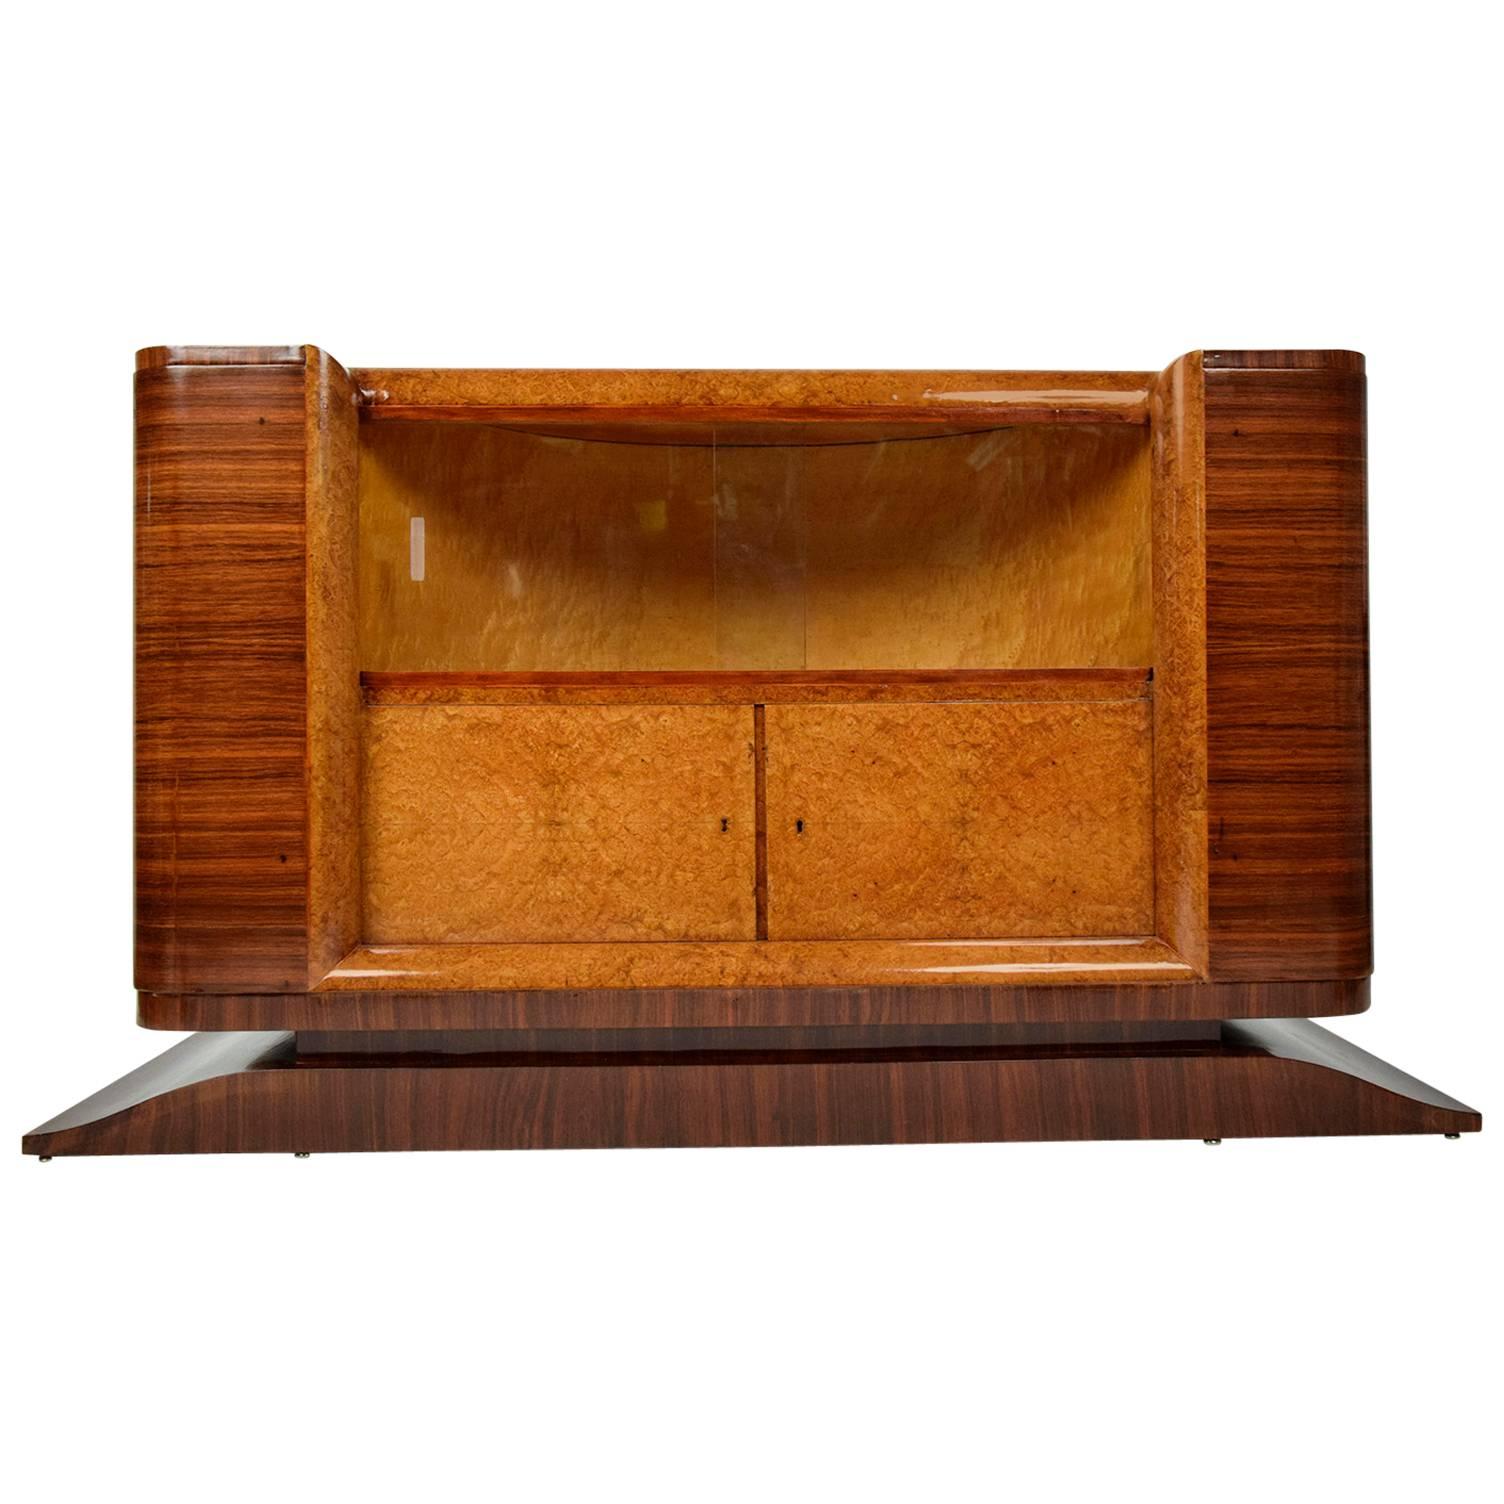 French Art Deco Dry Bar or Sideboard